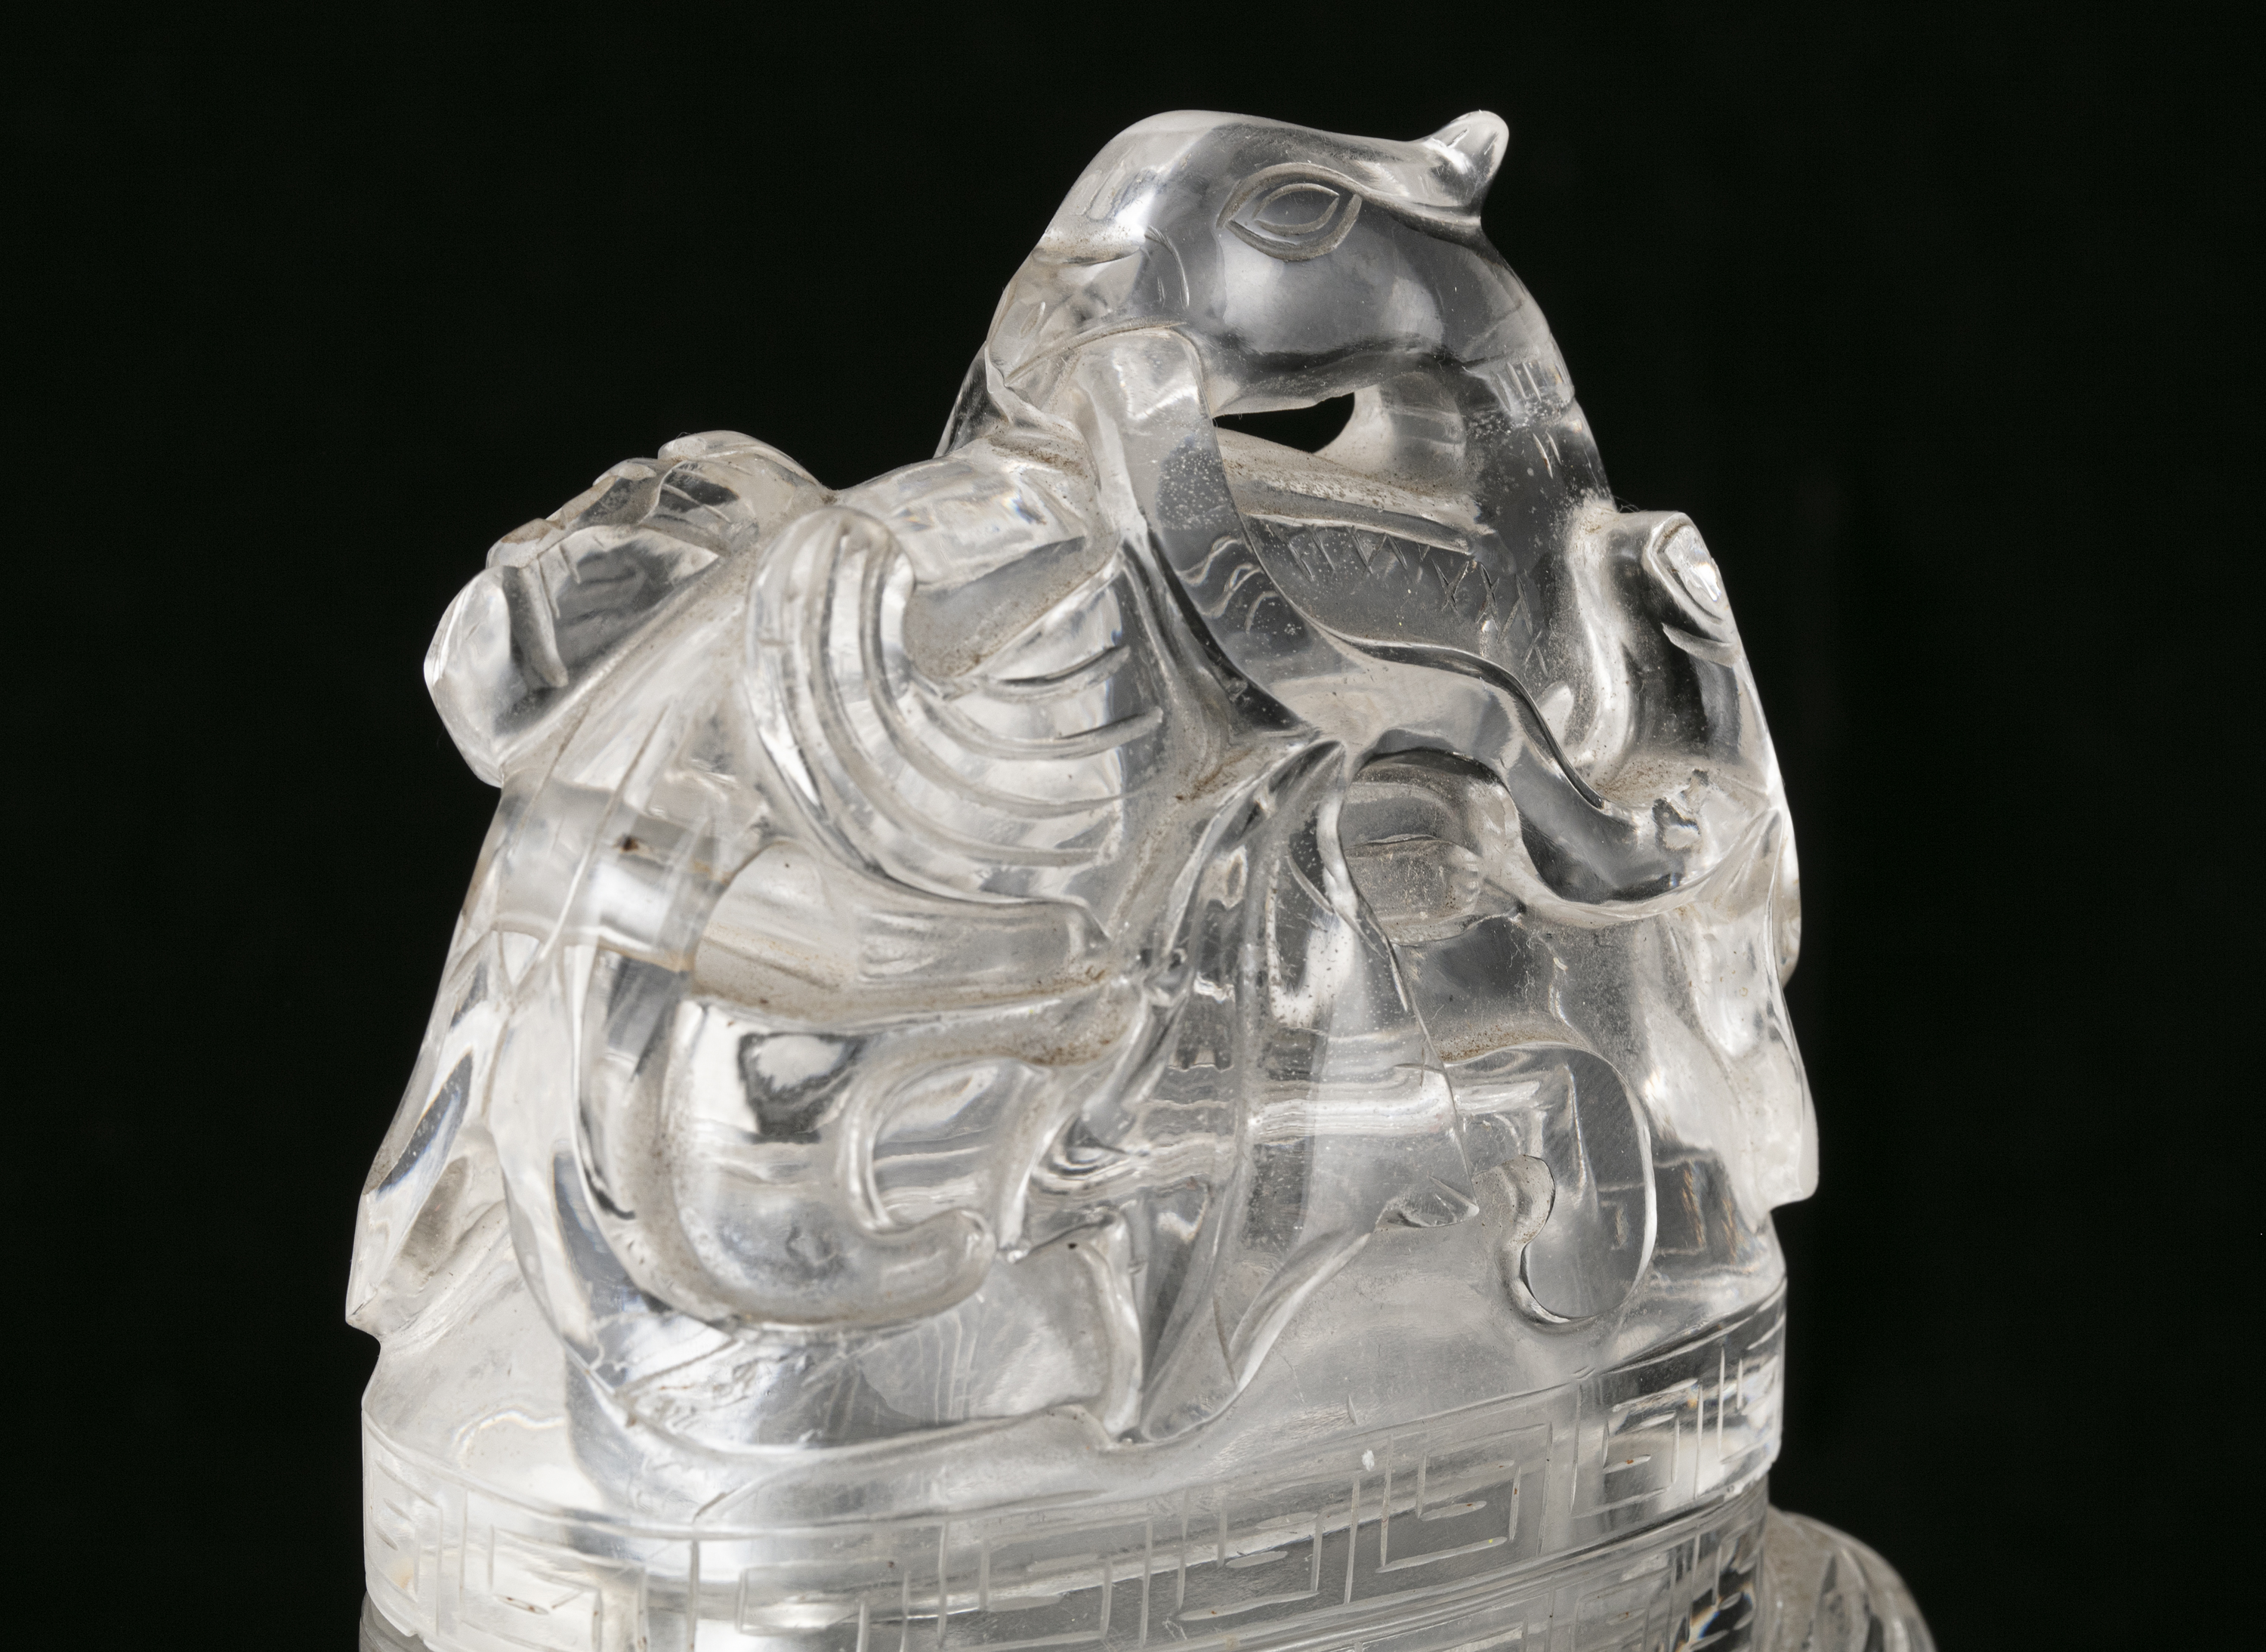 A LARGE ROCK-CRYSTAL LIDDED VASE WITH LOOSE RINGS HANDLES China, Qing Dynasty, 19th century Carved - Image 20 of 42